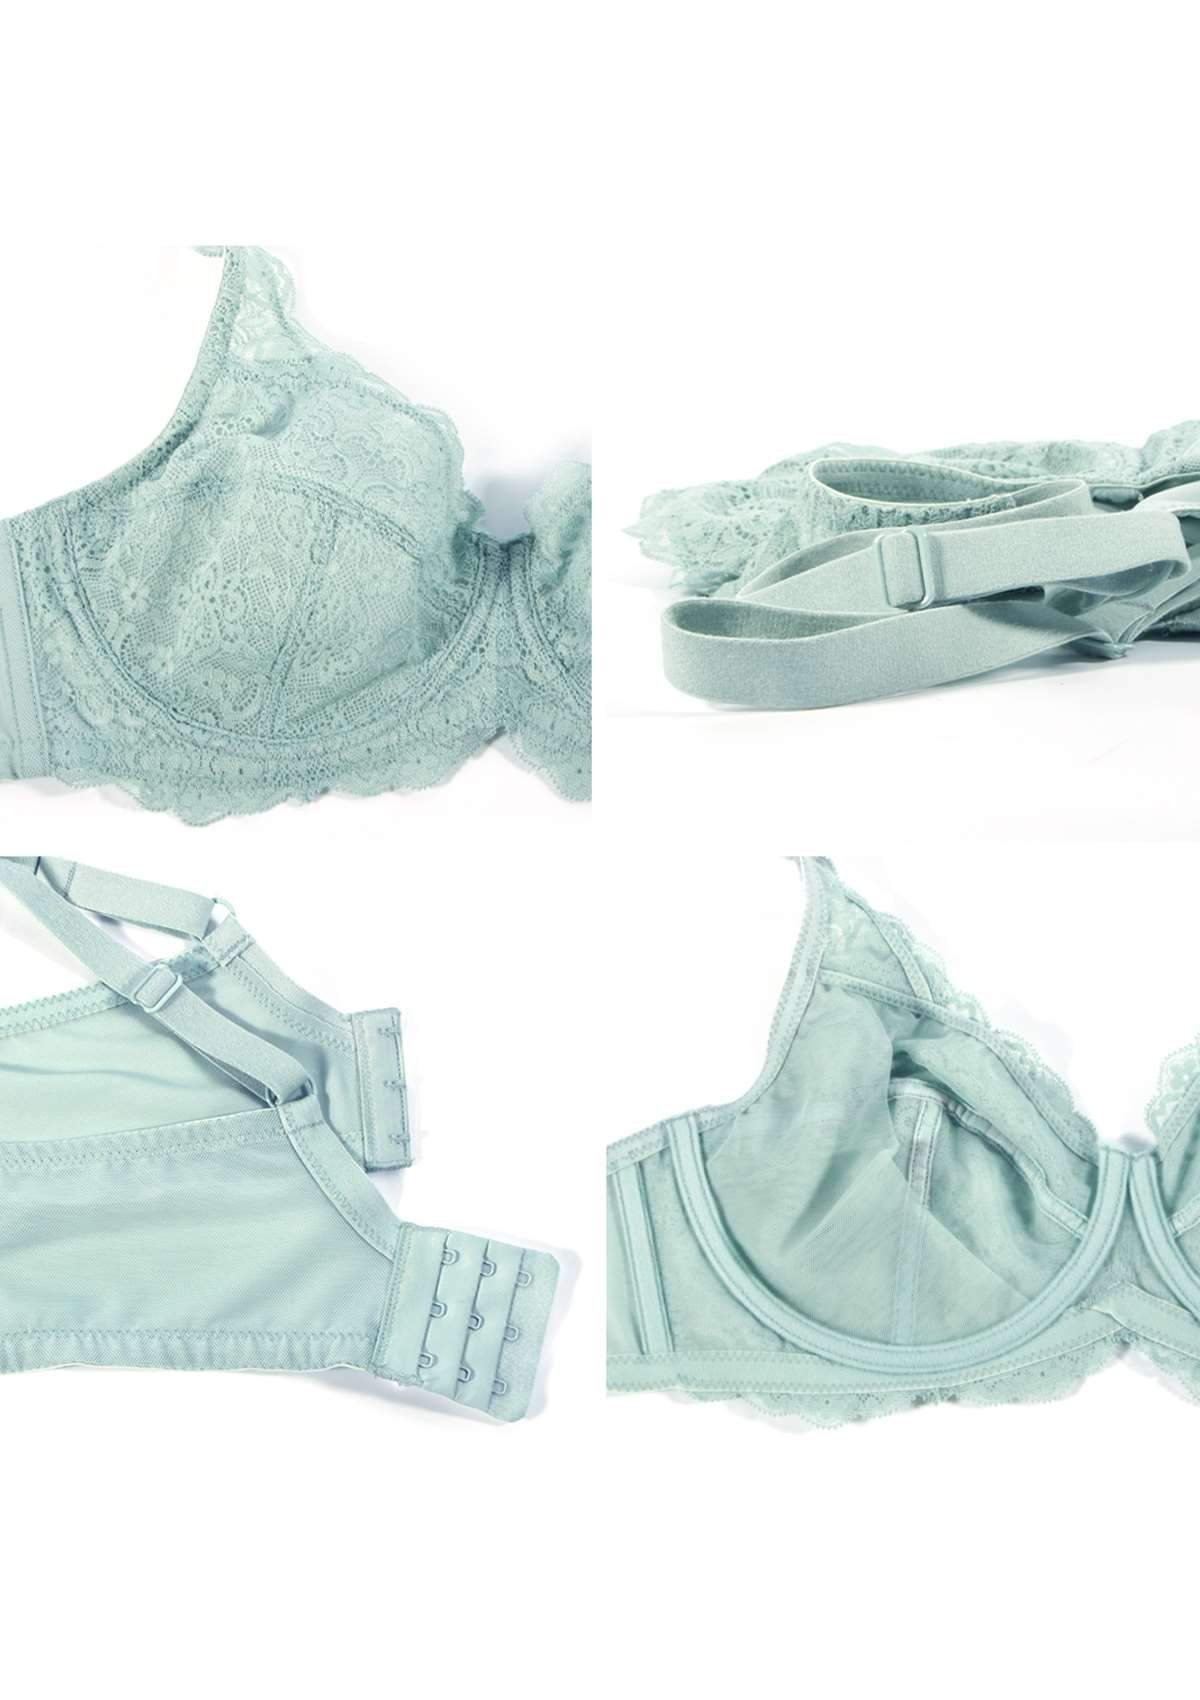 HSIA All-Over Floral Lace: Best Bra For Elderly With Sagging Breasts - Pewter Blue / 38 / D